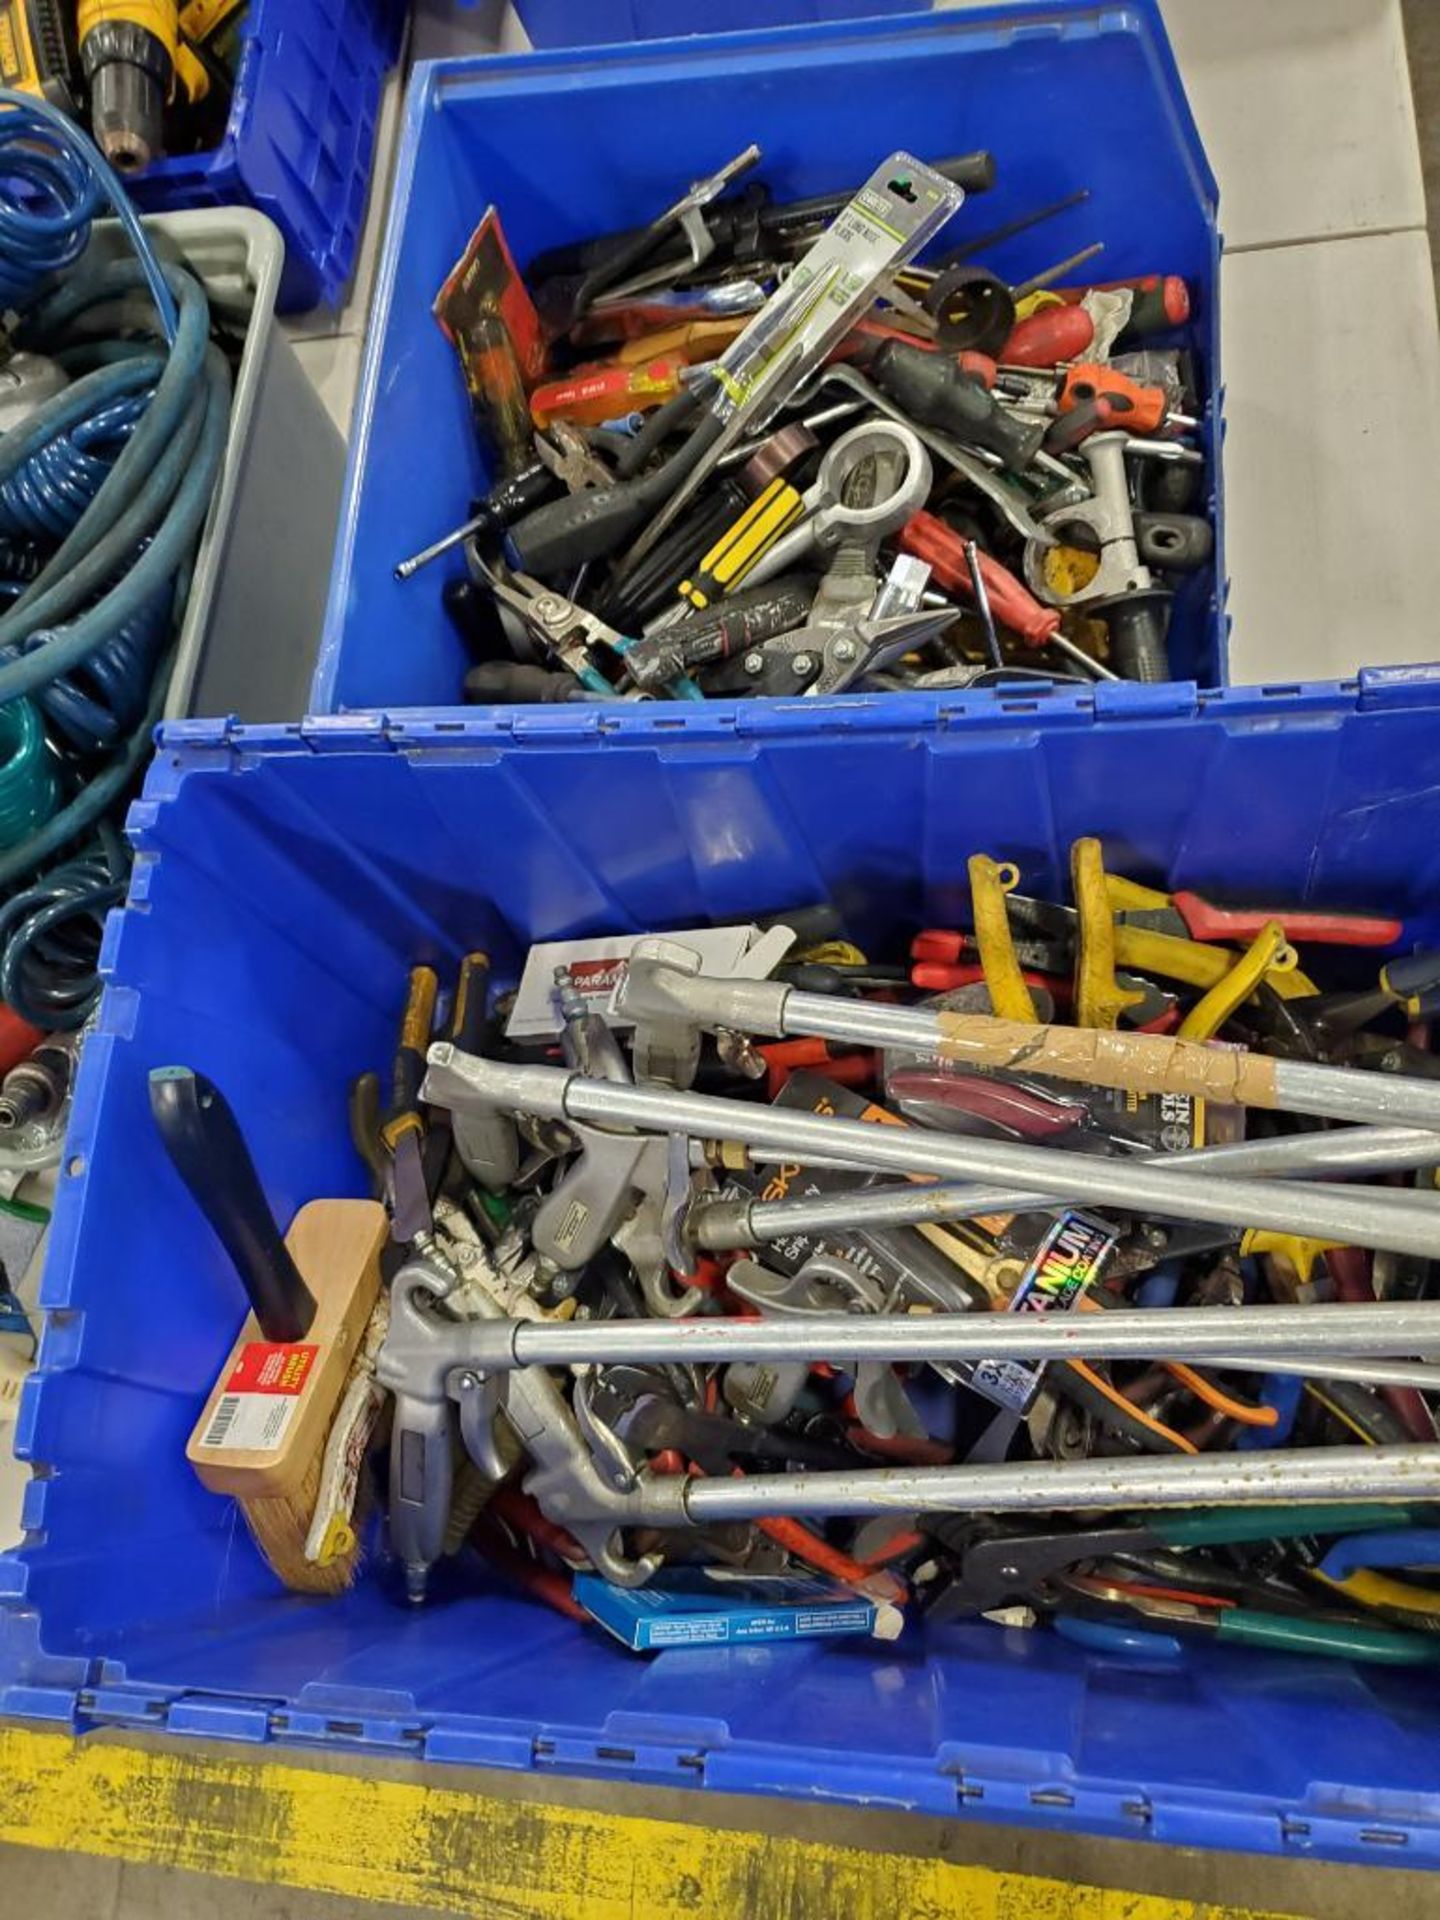 Assorted hand and air tools. Applicators, cutters, pliers, clamps.